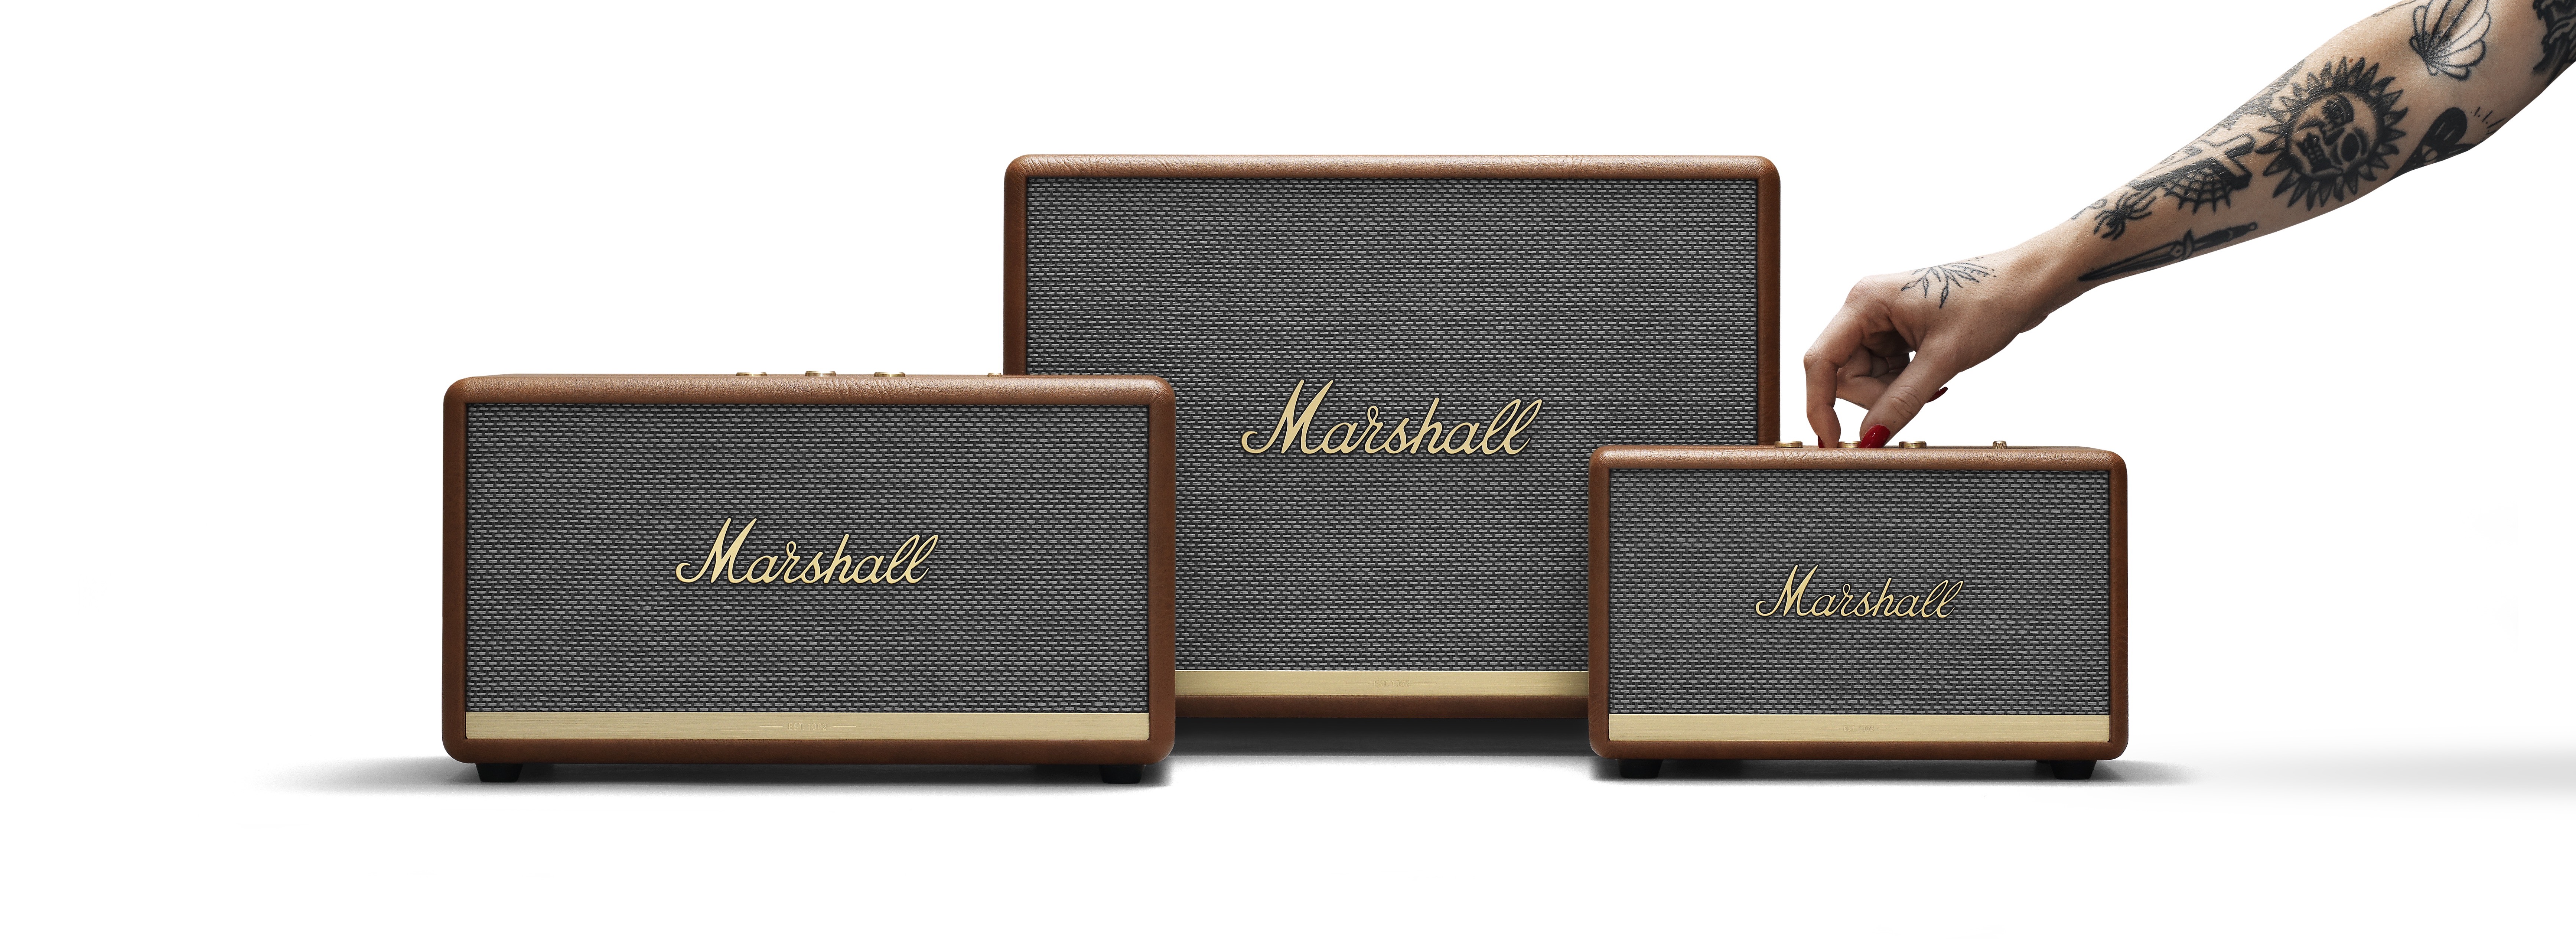 Marshall Bluetooth speakers get a new brown colorway - 9to5Toys